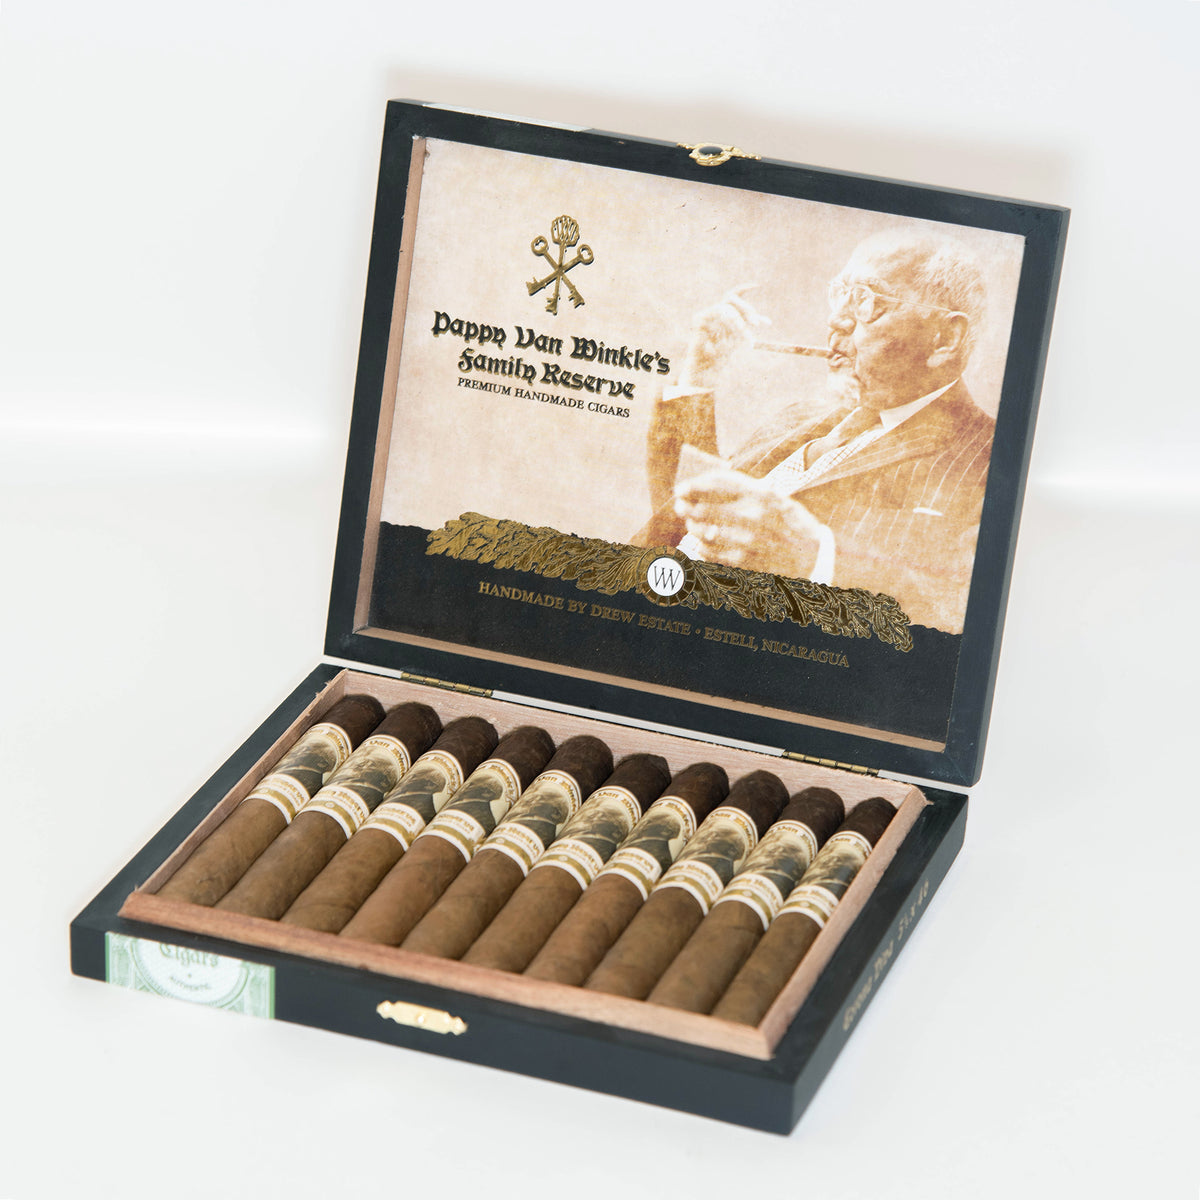 Pappy Van Winkle Barrel Fermented Cigars: Limited Edition Corona Viva (Box of 10)